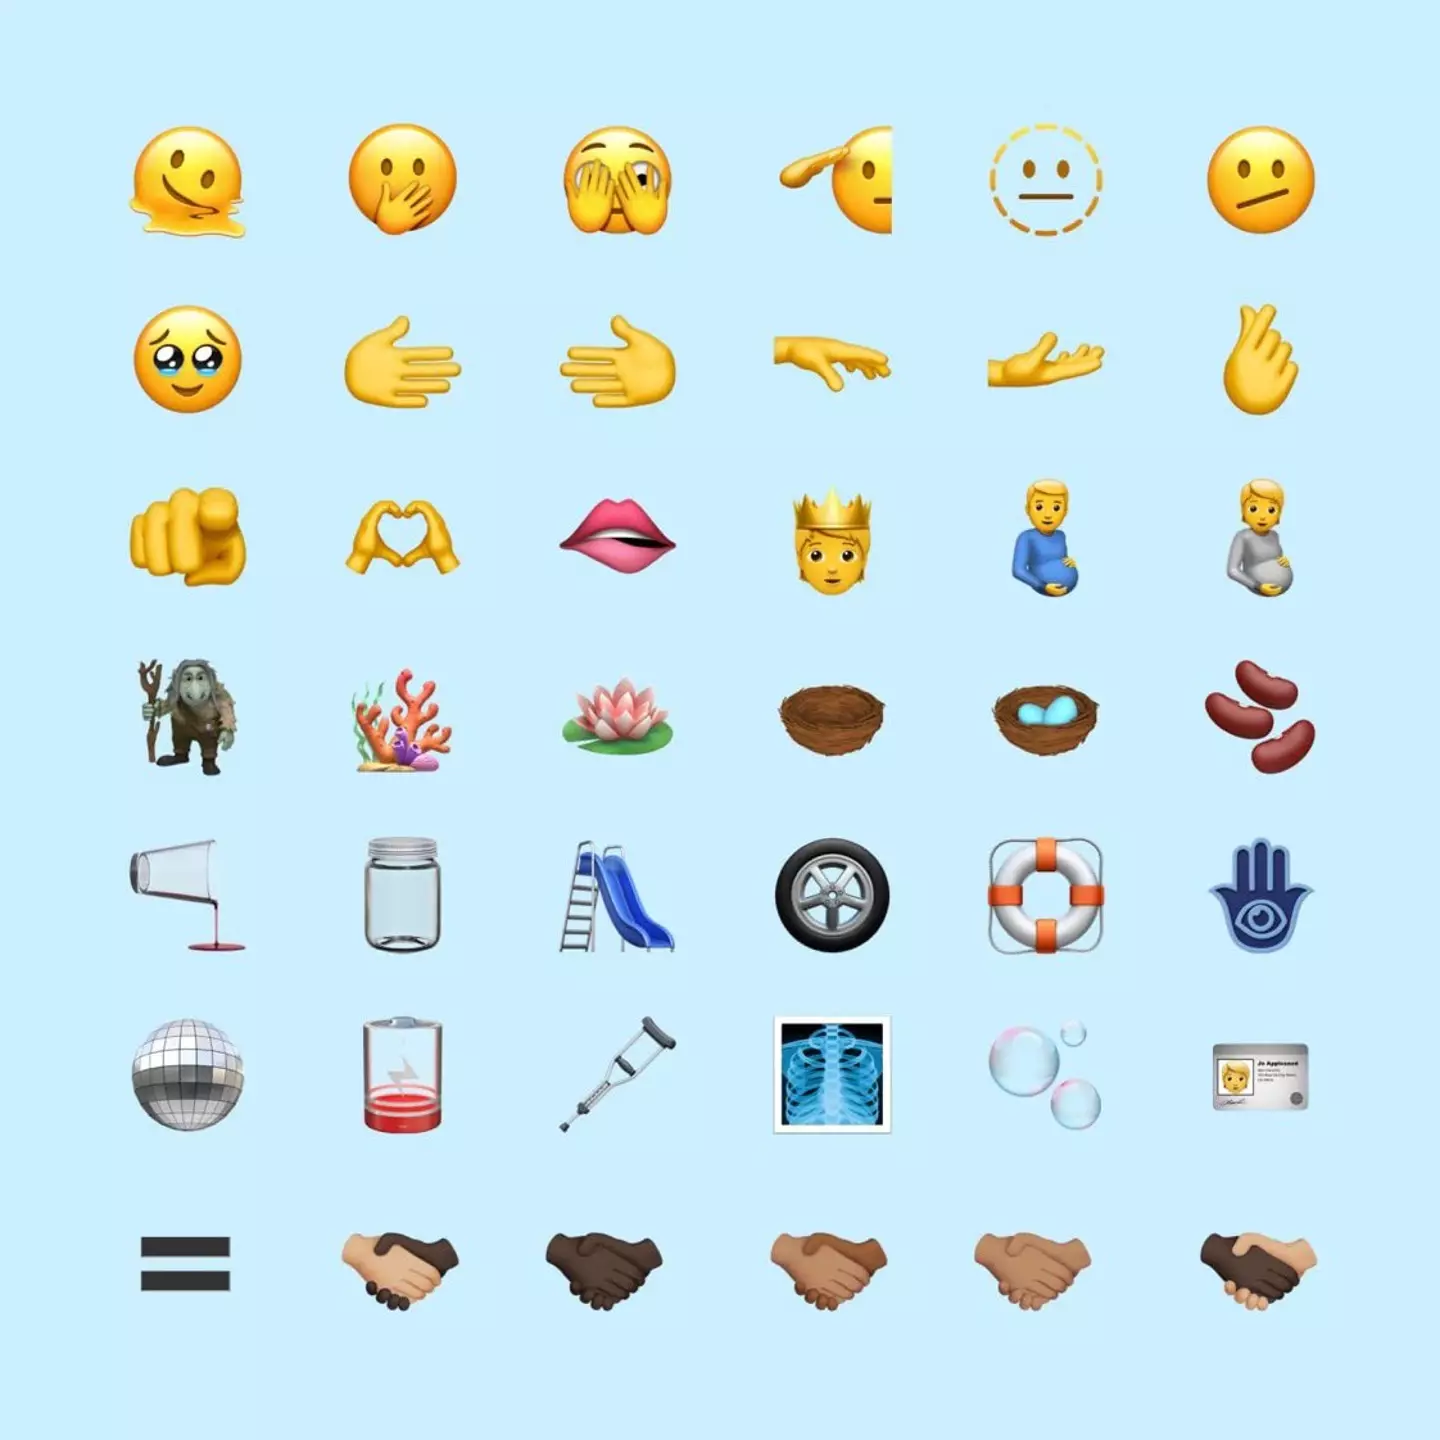 These emojis will be released later this year. (